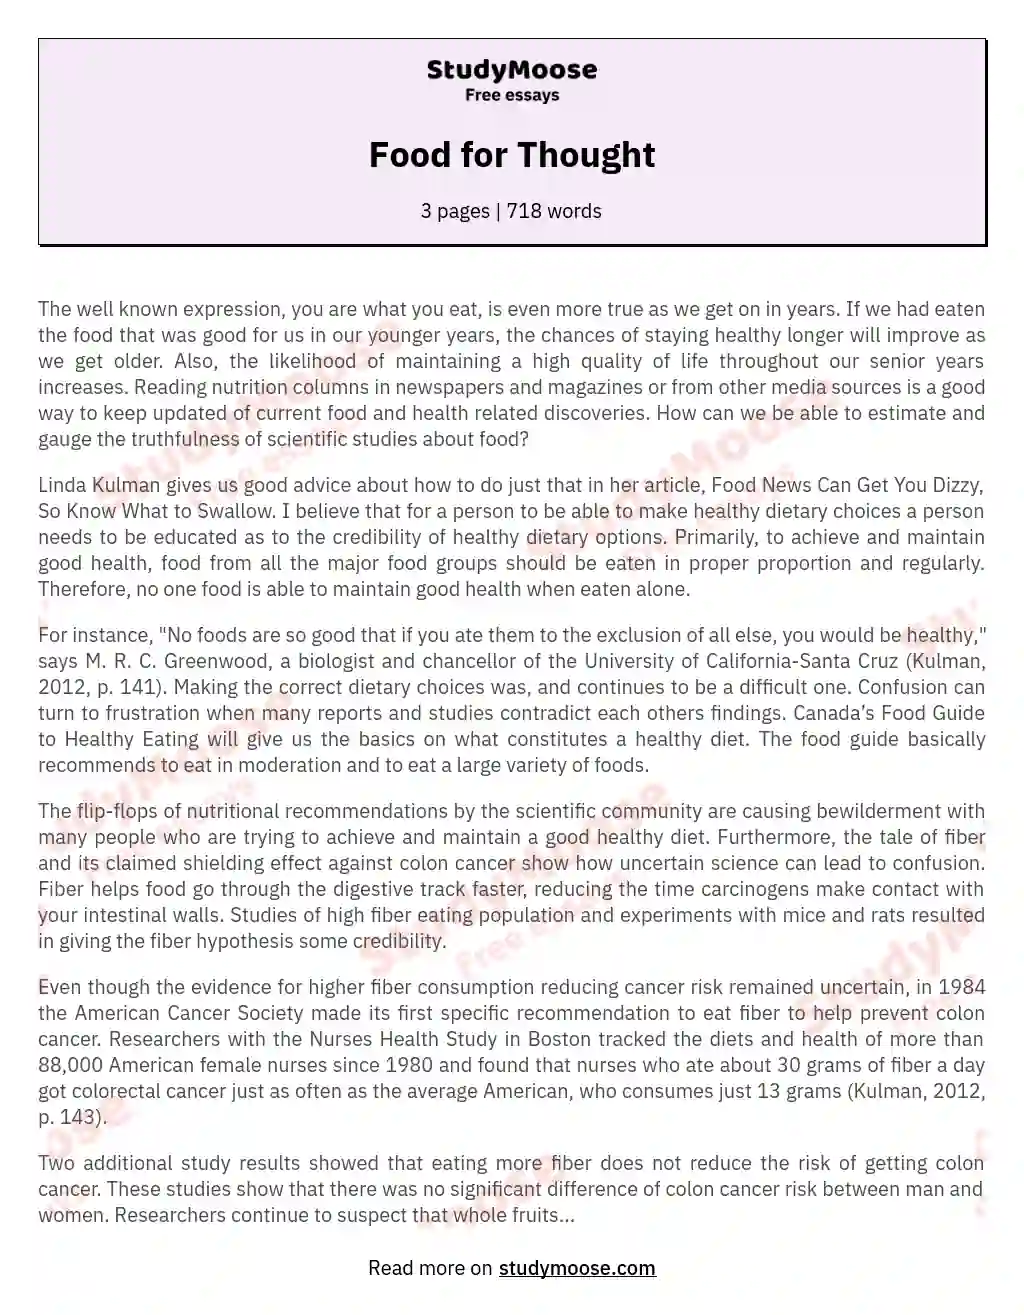 Food for Thought essay